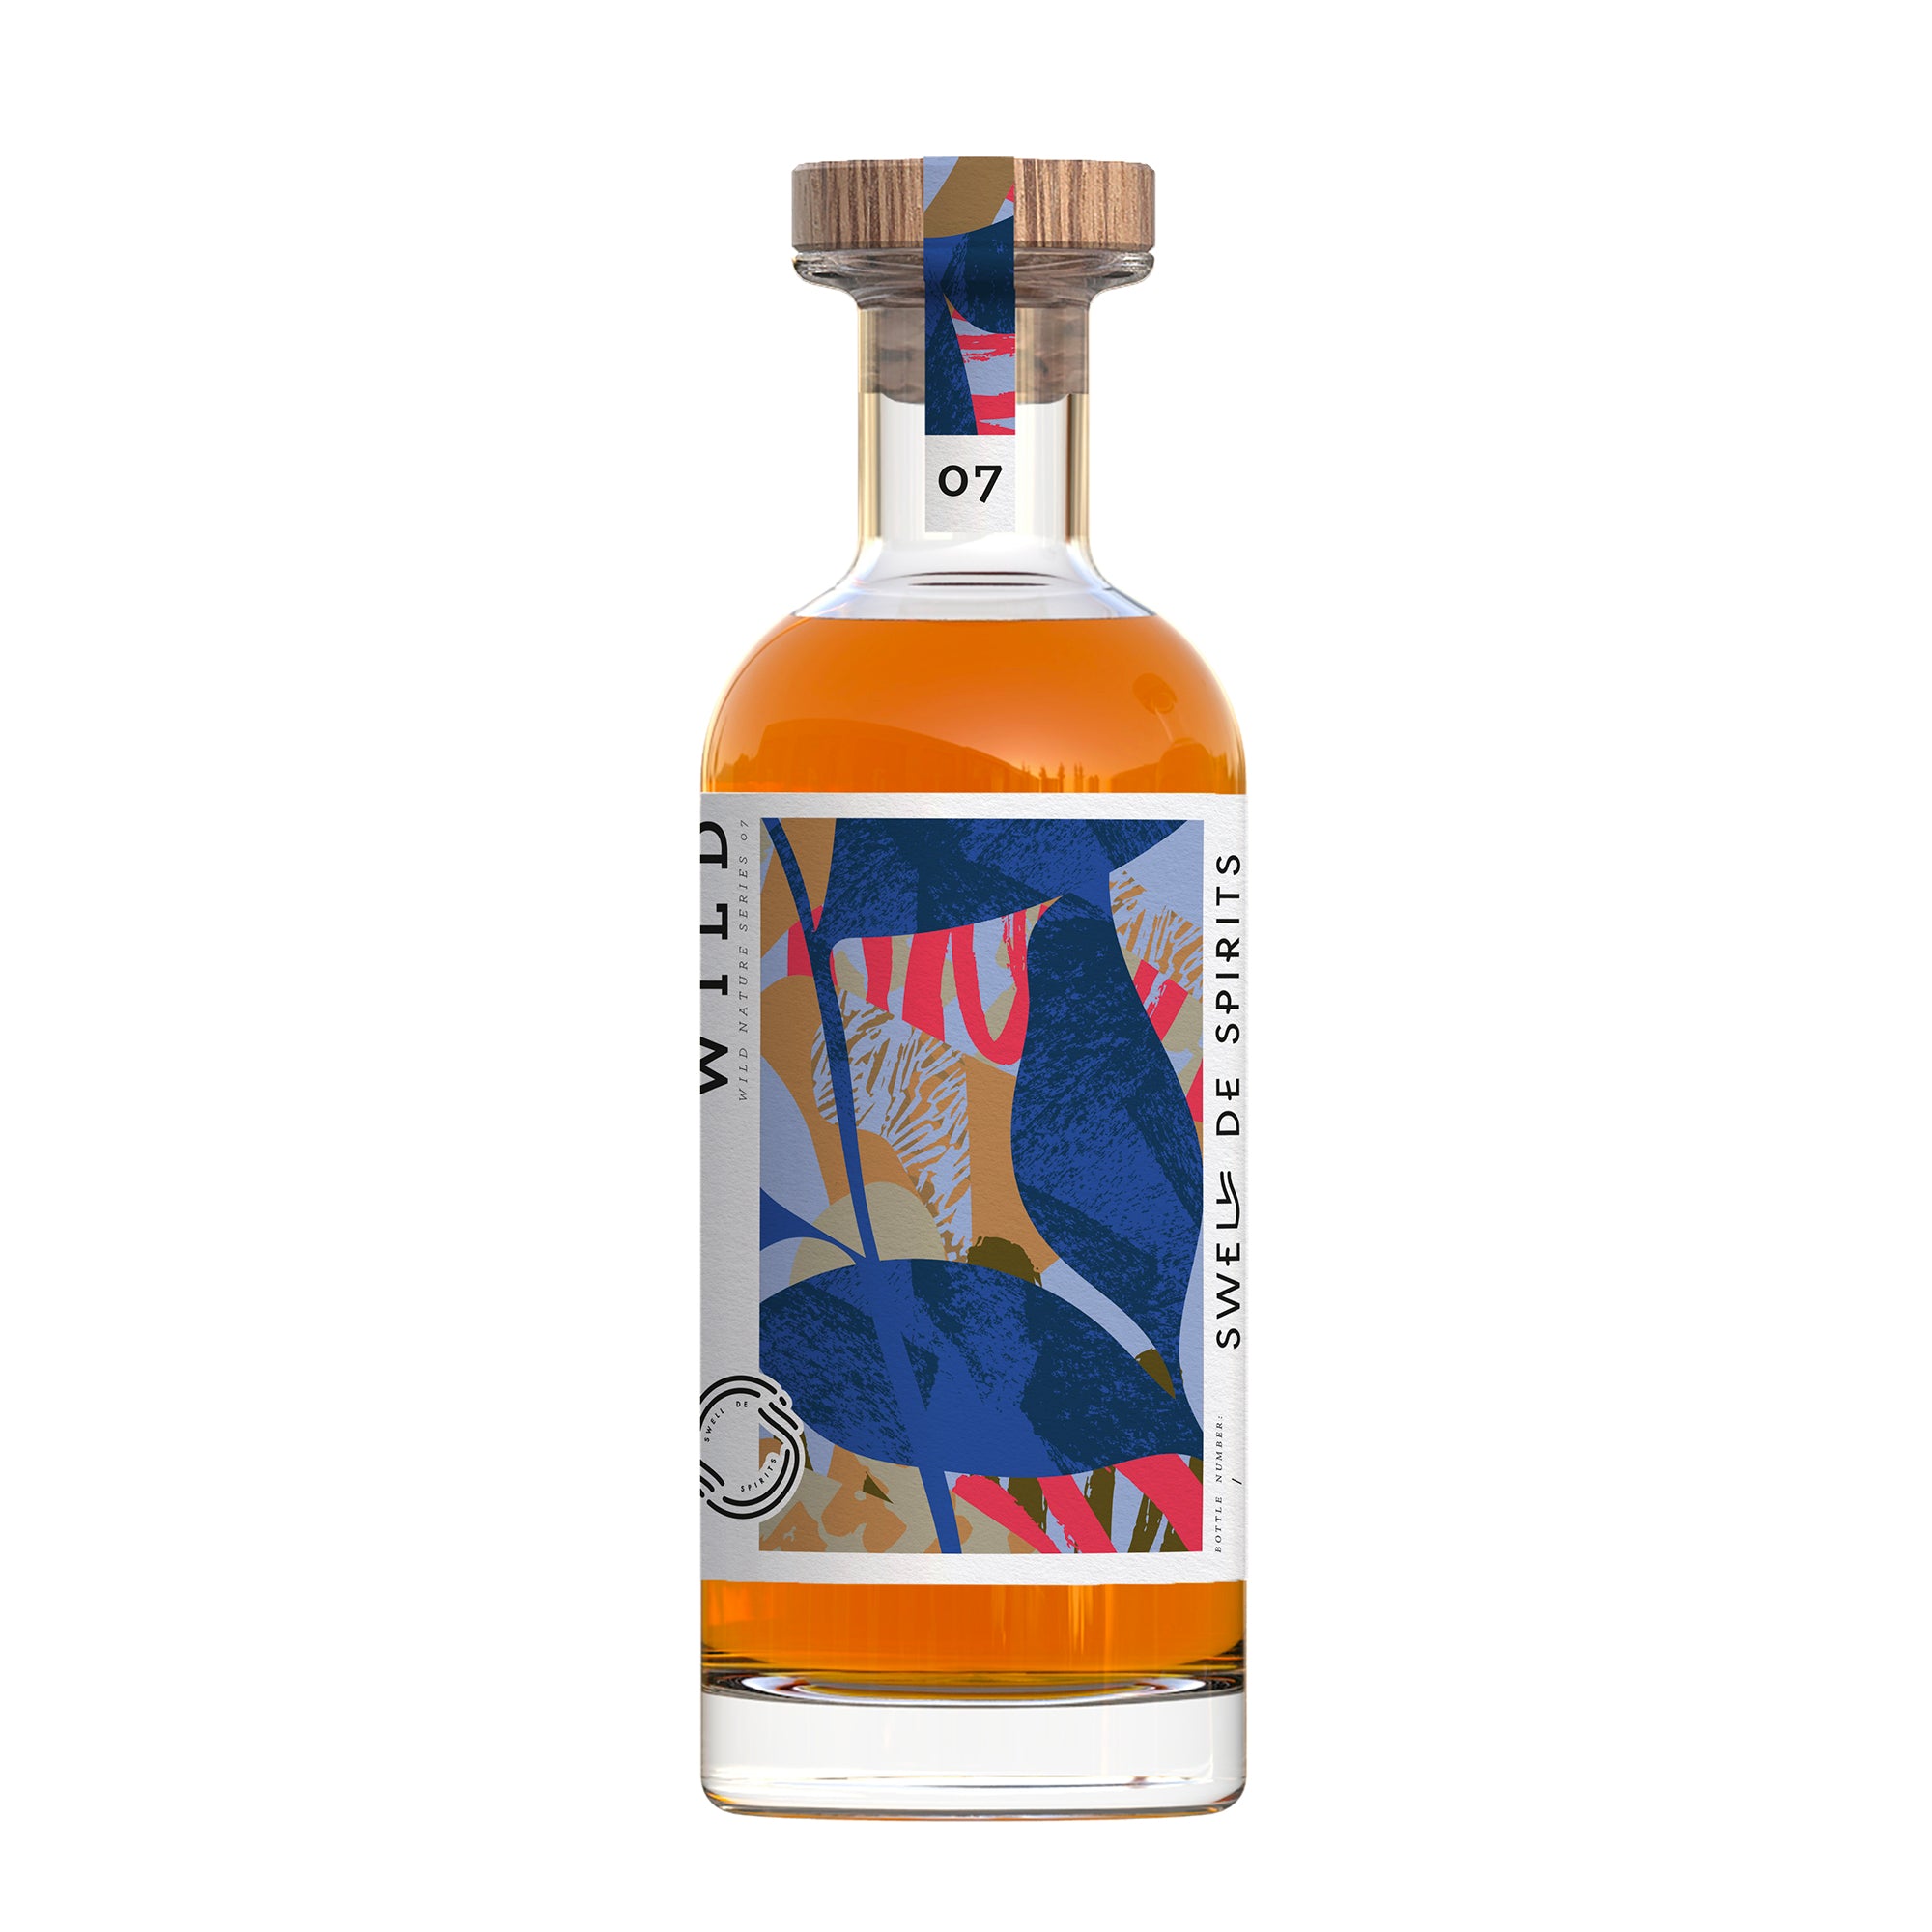 #7 Swell de spirits Wild Series Rhum agricole Isautier RVA 2011, Full tropical, 59,4% ABV, Single Cask 316 bouteilles, 50cl